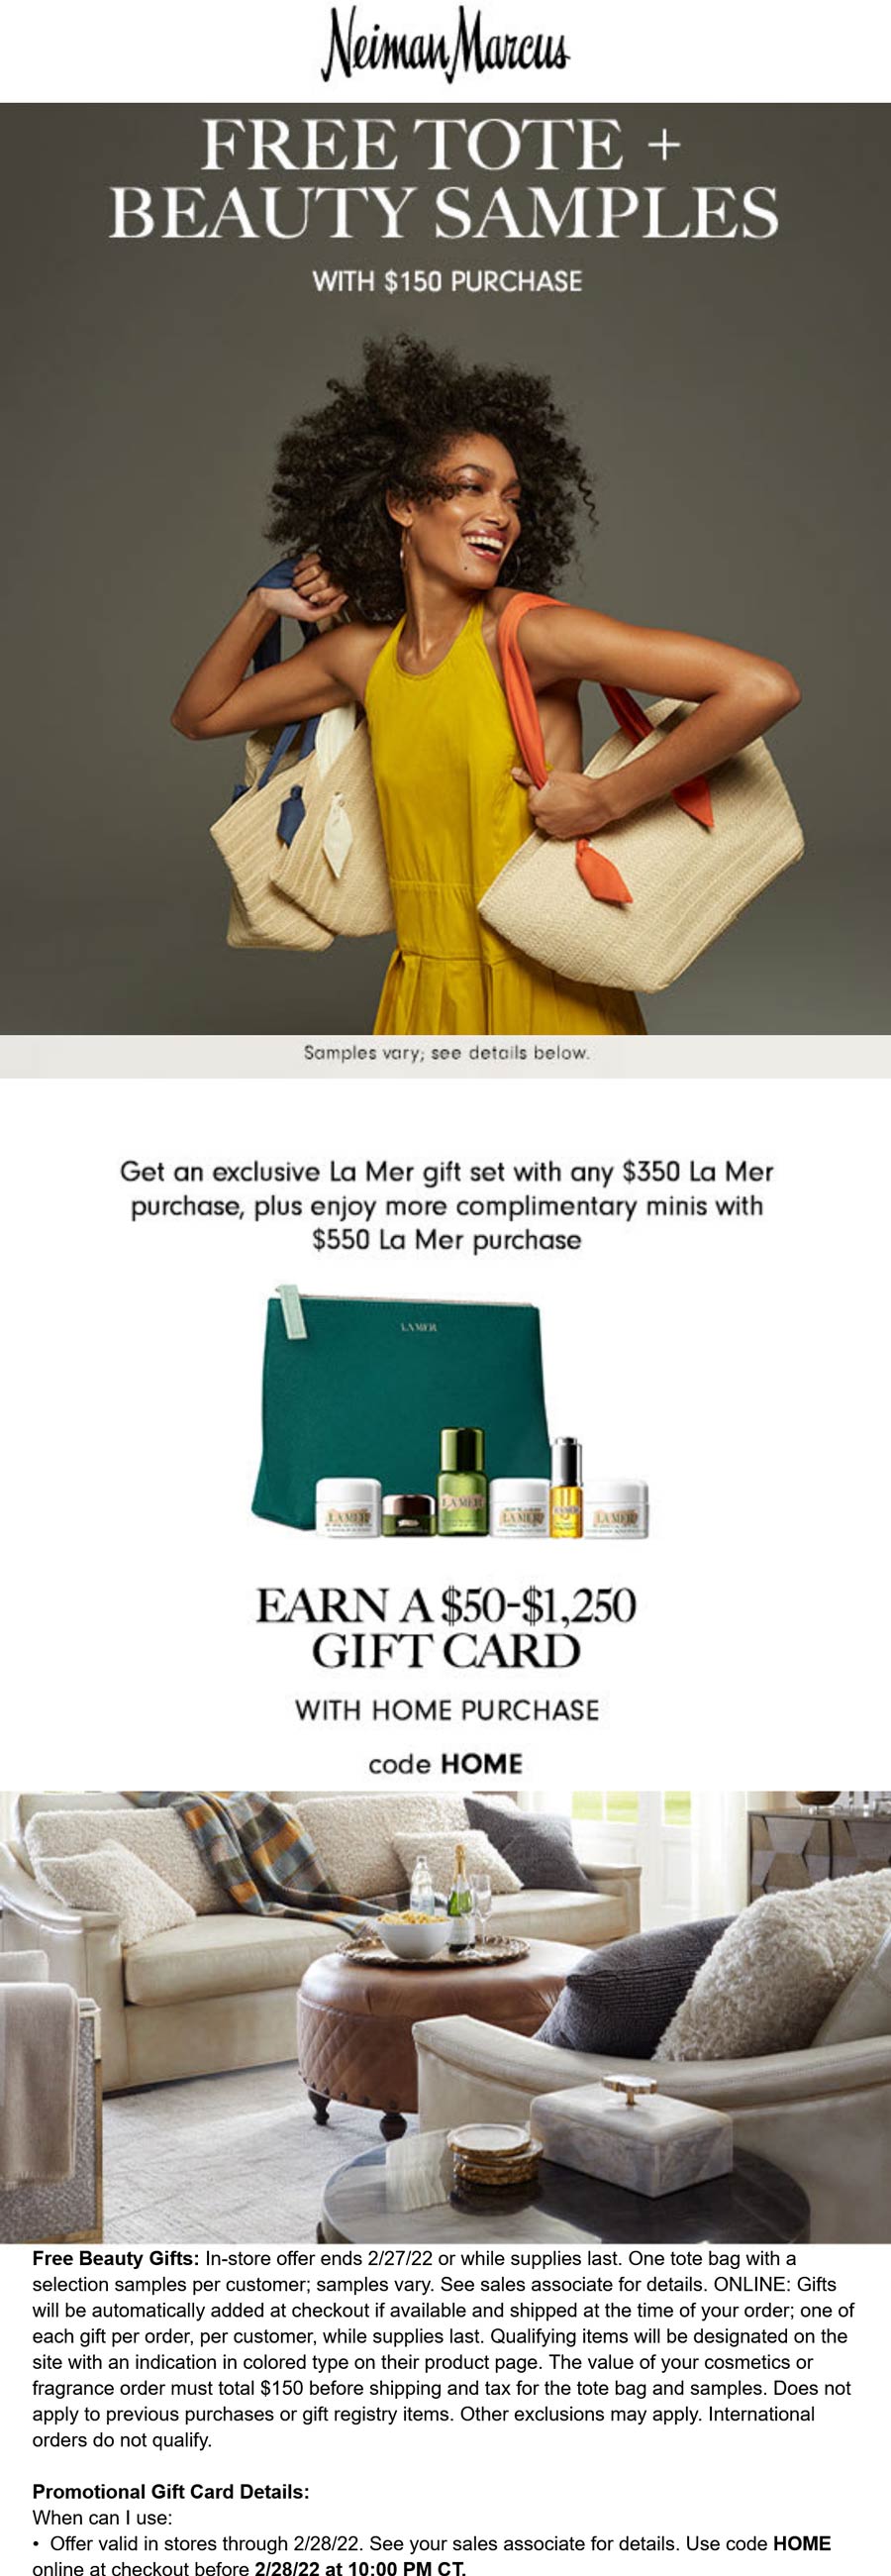 Neiman Marcus stores Coupon  Free tote & beauty on $150 & more today at Neiman Marcus via promo code HOME #neimanmarcus 